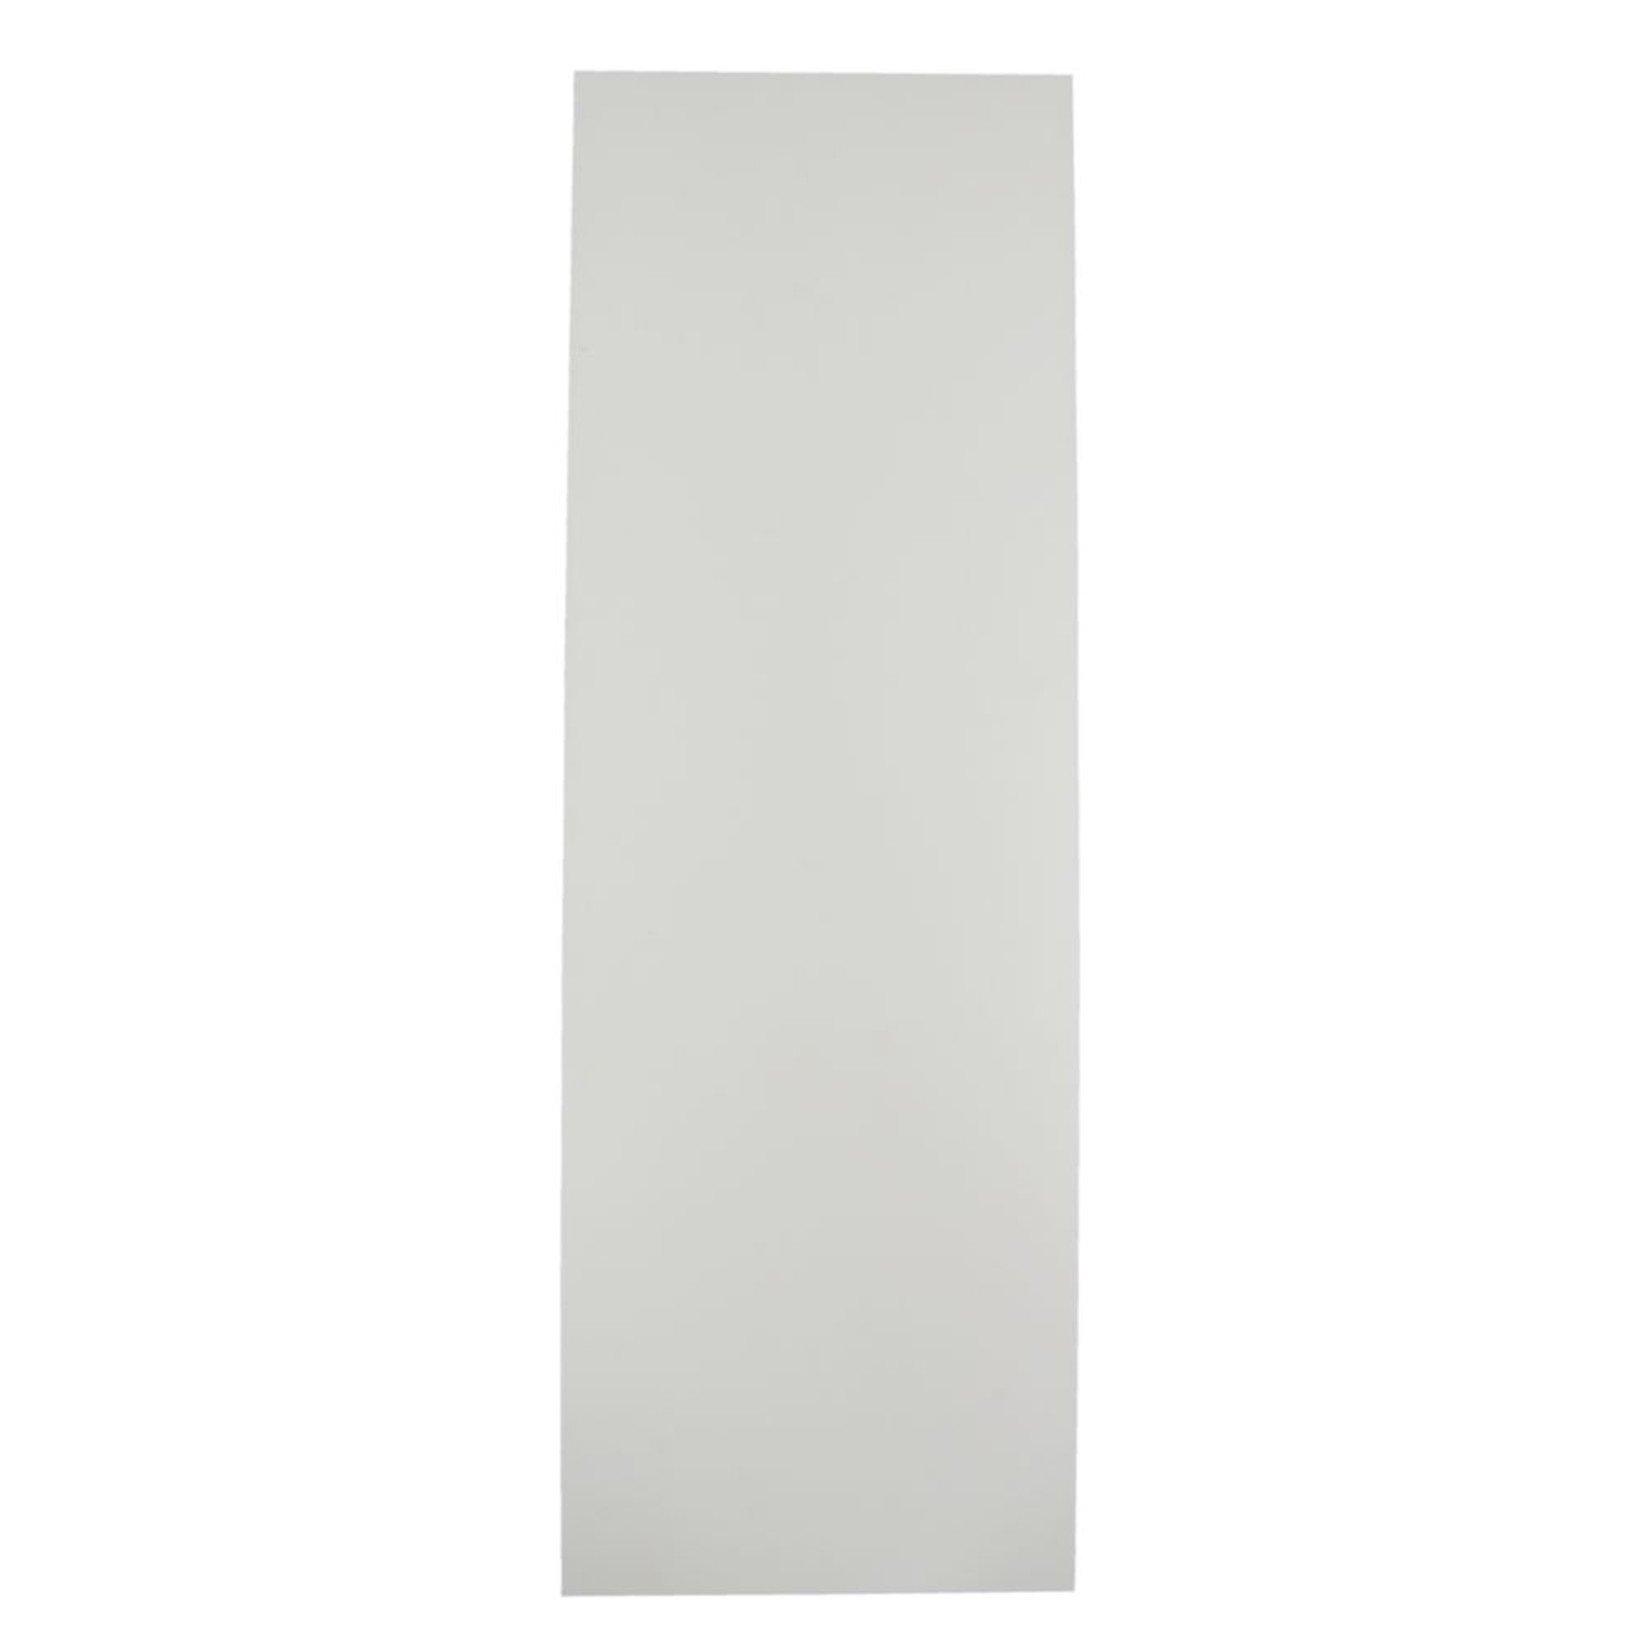 NRS NRS SUP Board PVC Fabric Pieces